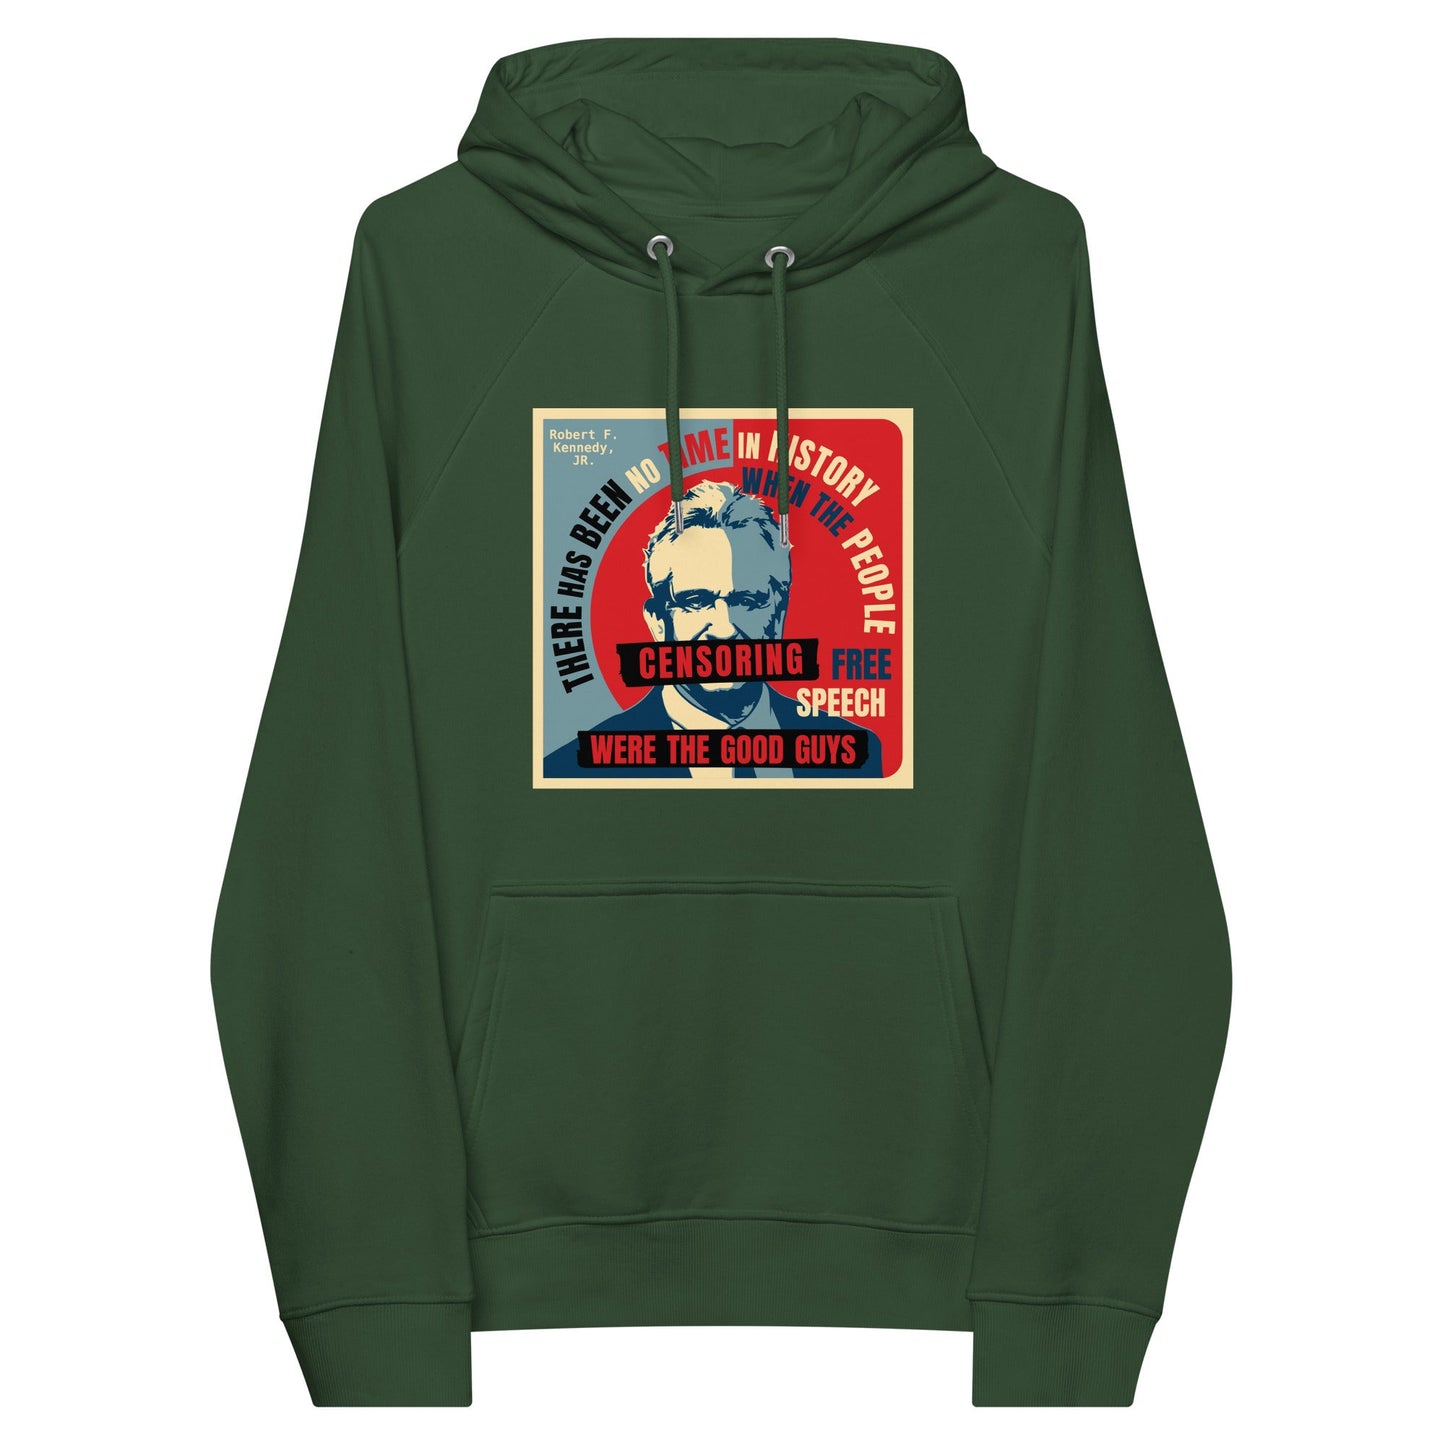 Free Speech Kennedy Unisex Hoodie - TEAM KENNEDY. All rights reserved